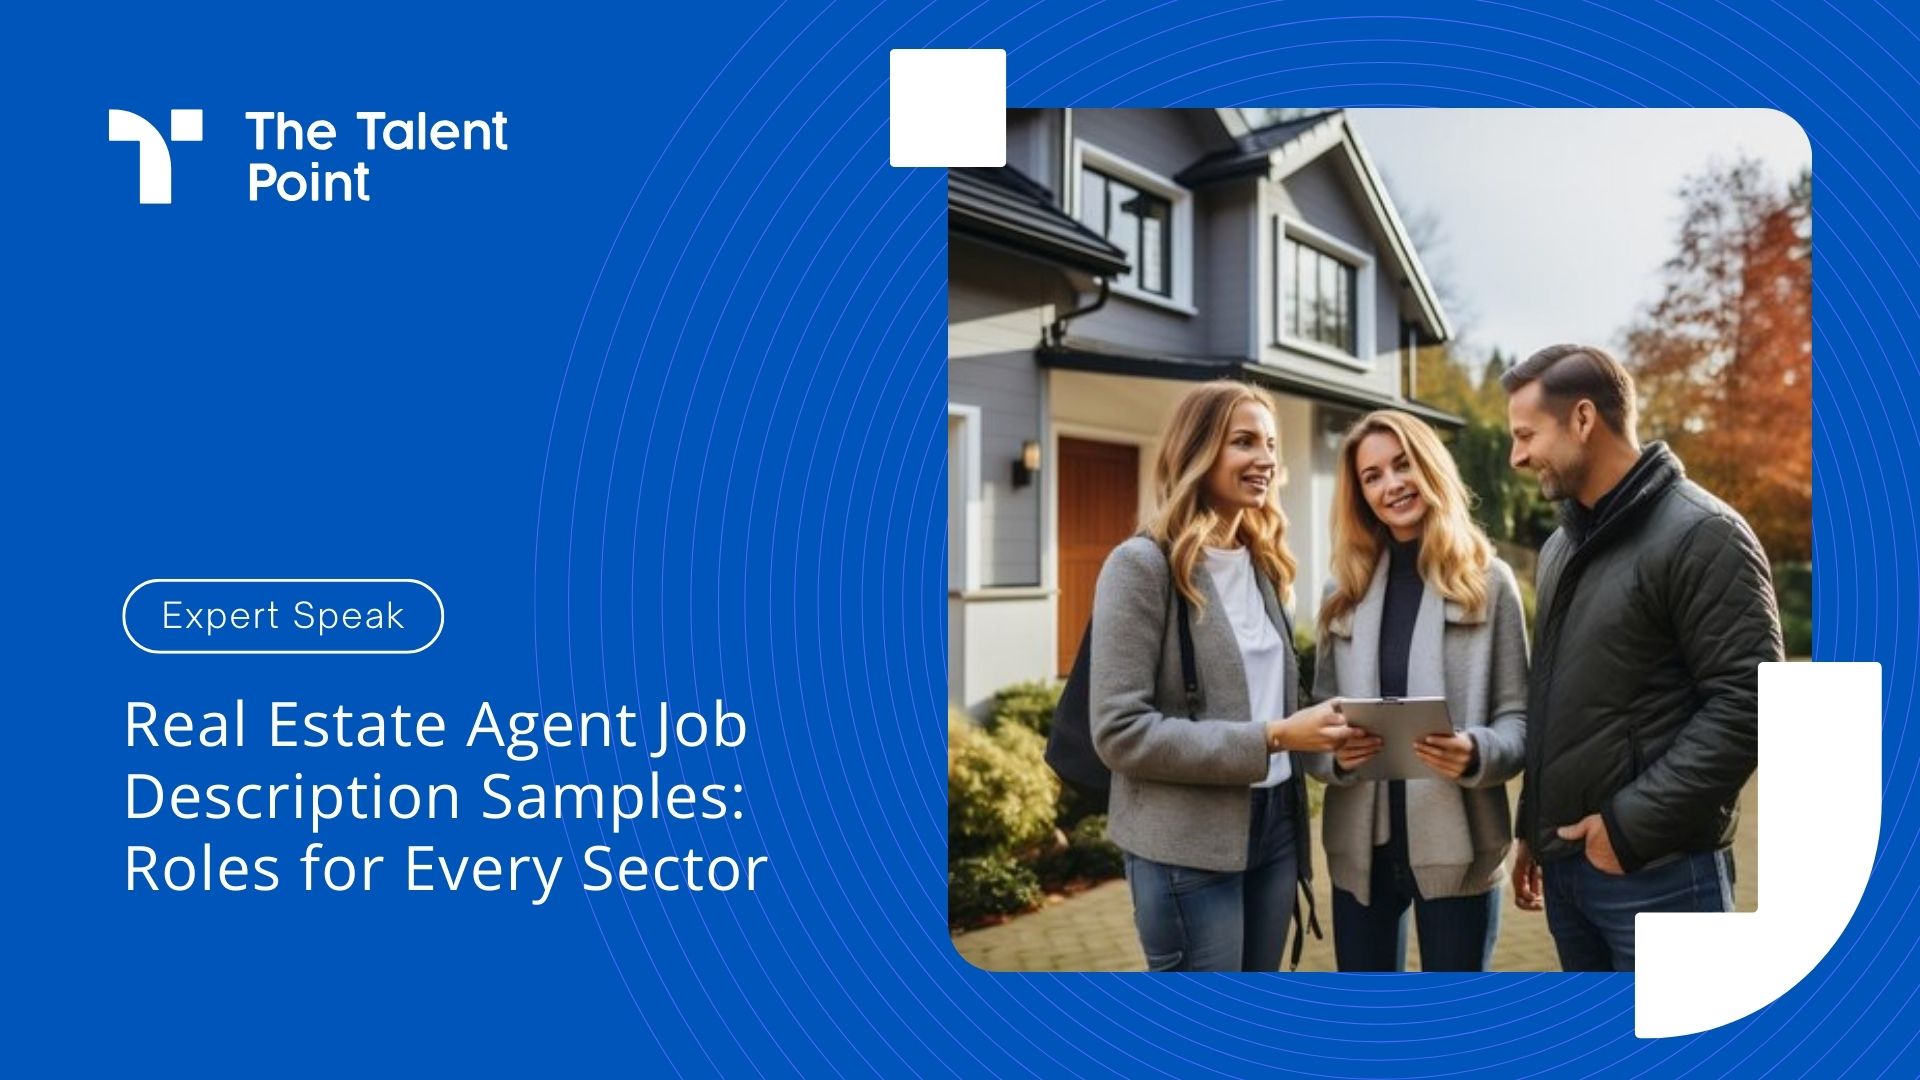 Real Estate Agent Job Description Samples: Roles for Every Sector